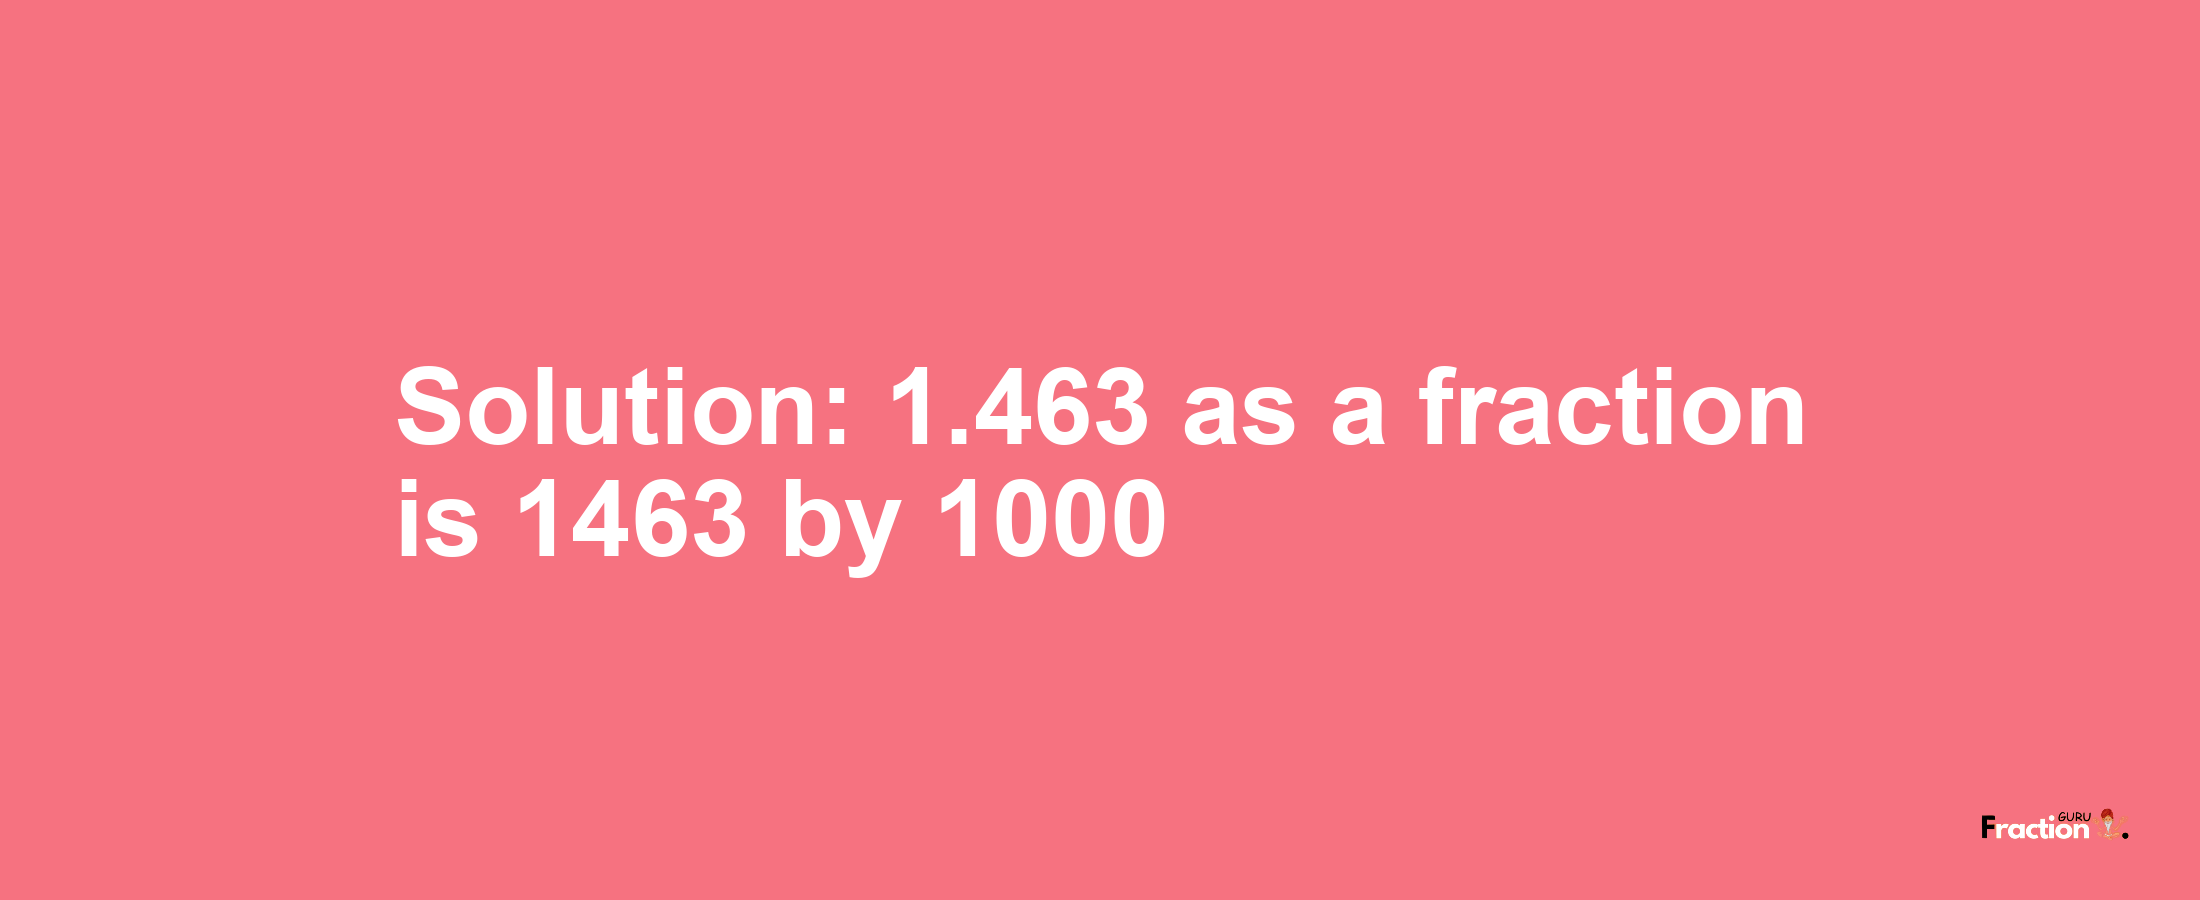 Solution:1.463 as a fraction is 1463/1000